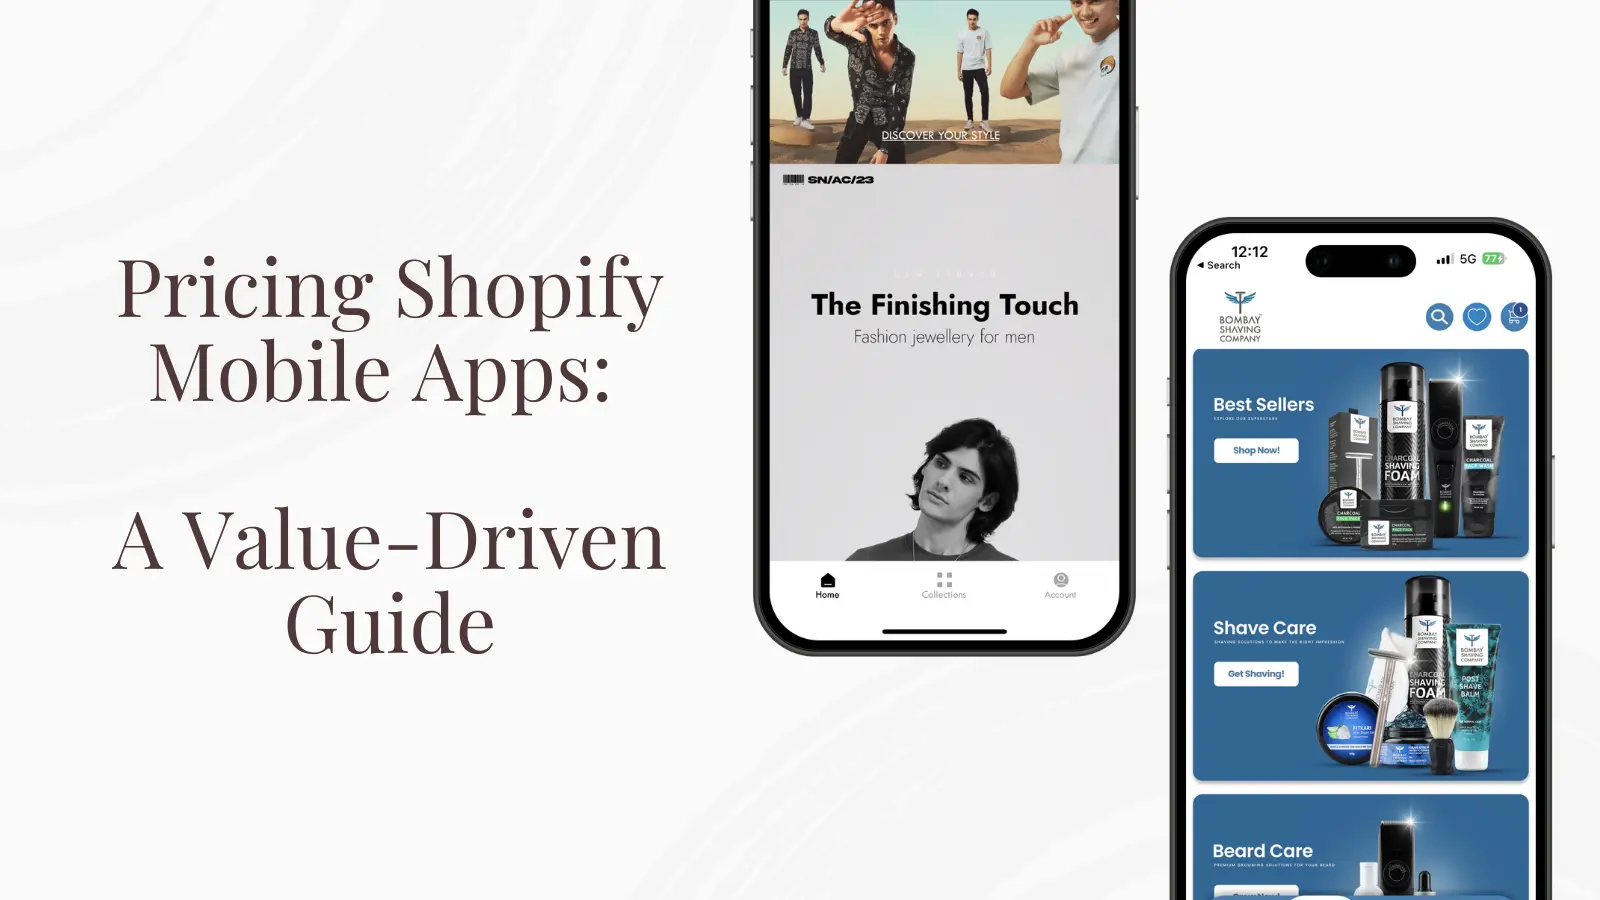 Pricing Shopify Mobile Apps: A Value-Driven Guide